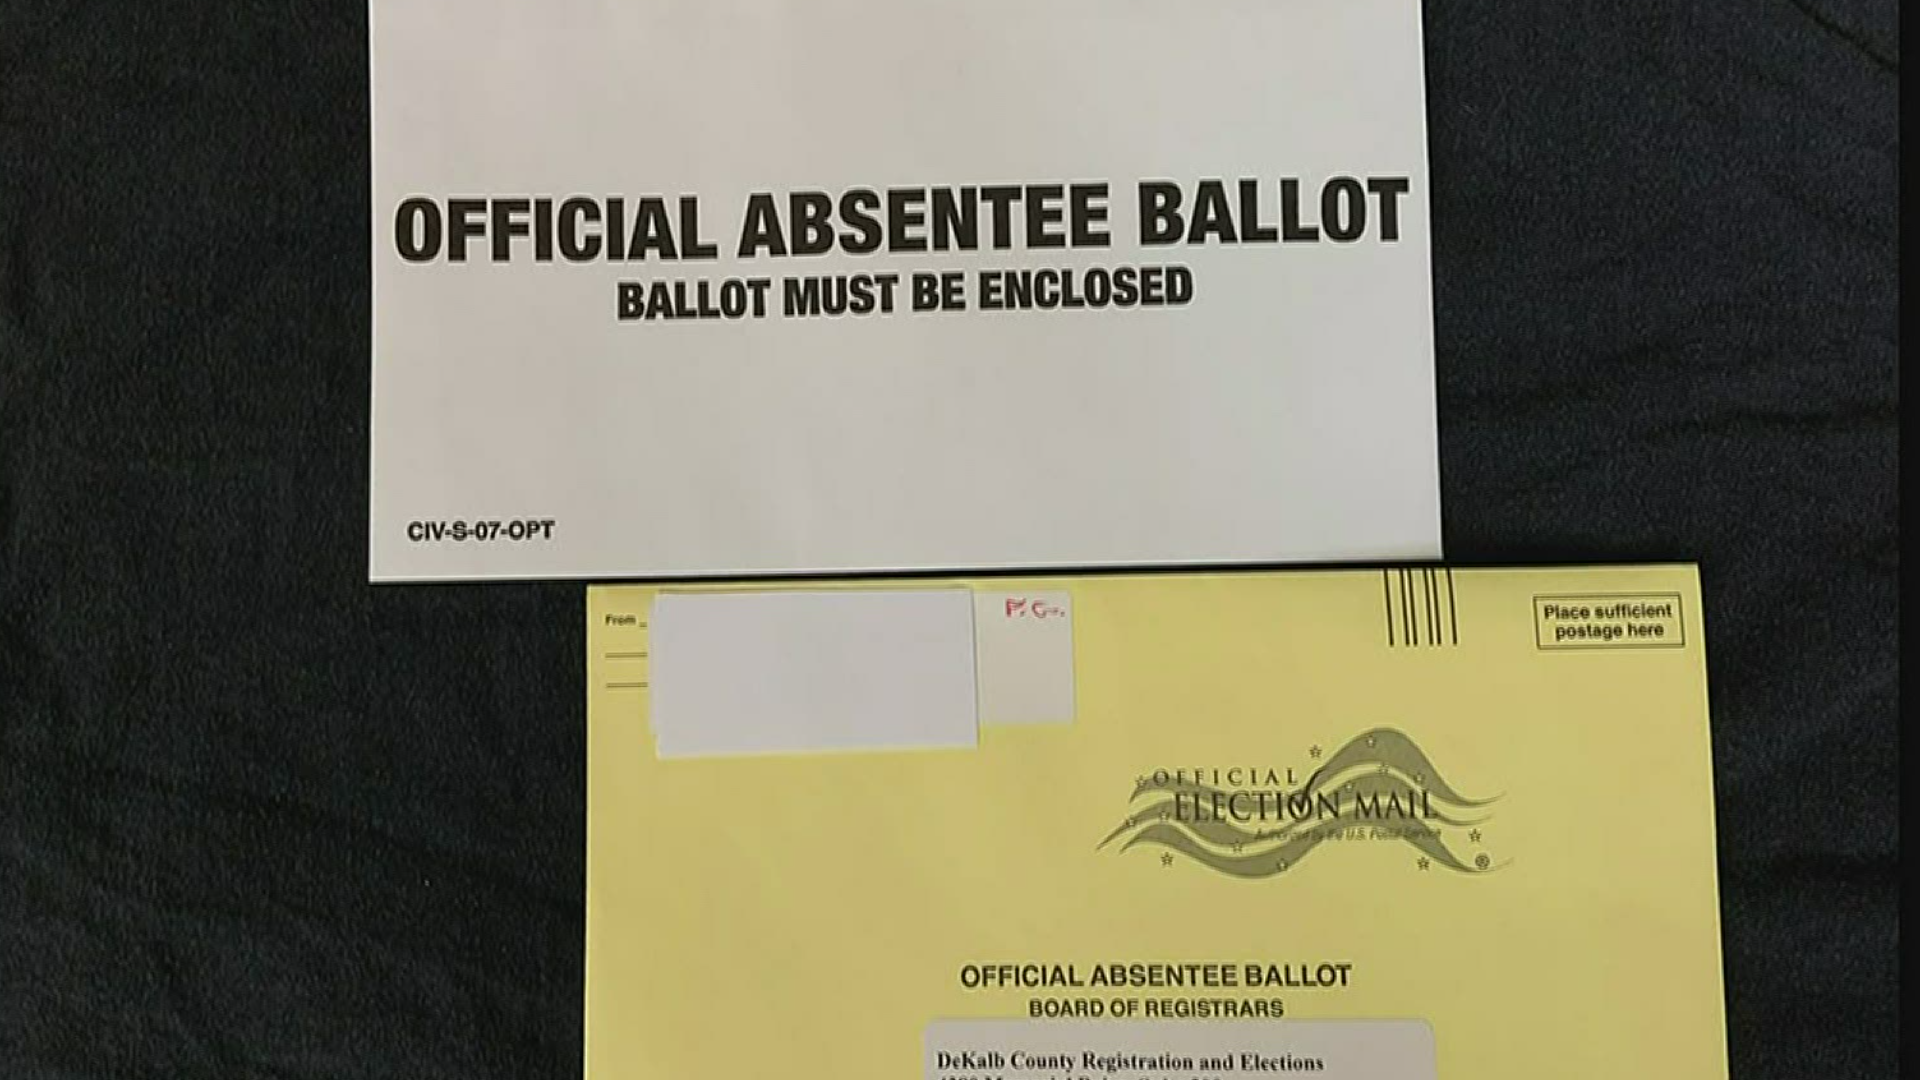 A missing envelope is raising questions about whether the state followed the law when it recently sent out absentee ballots.